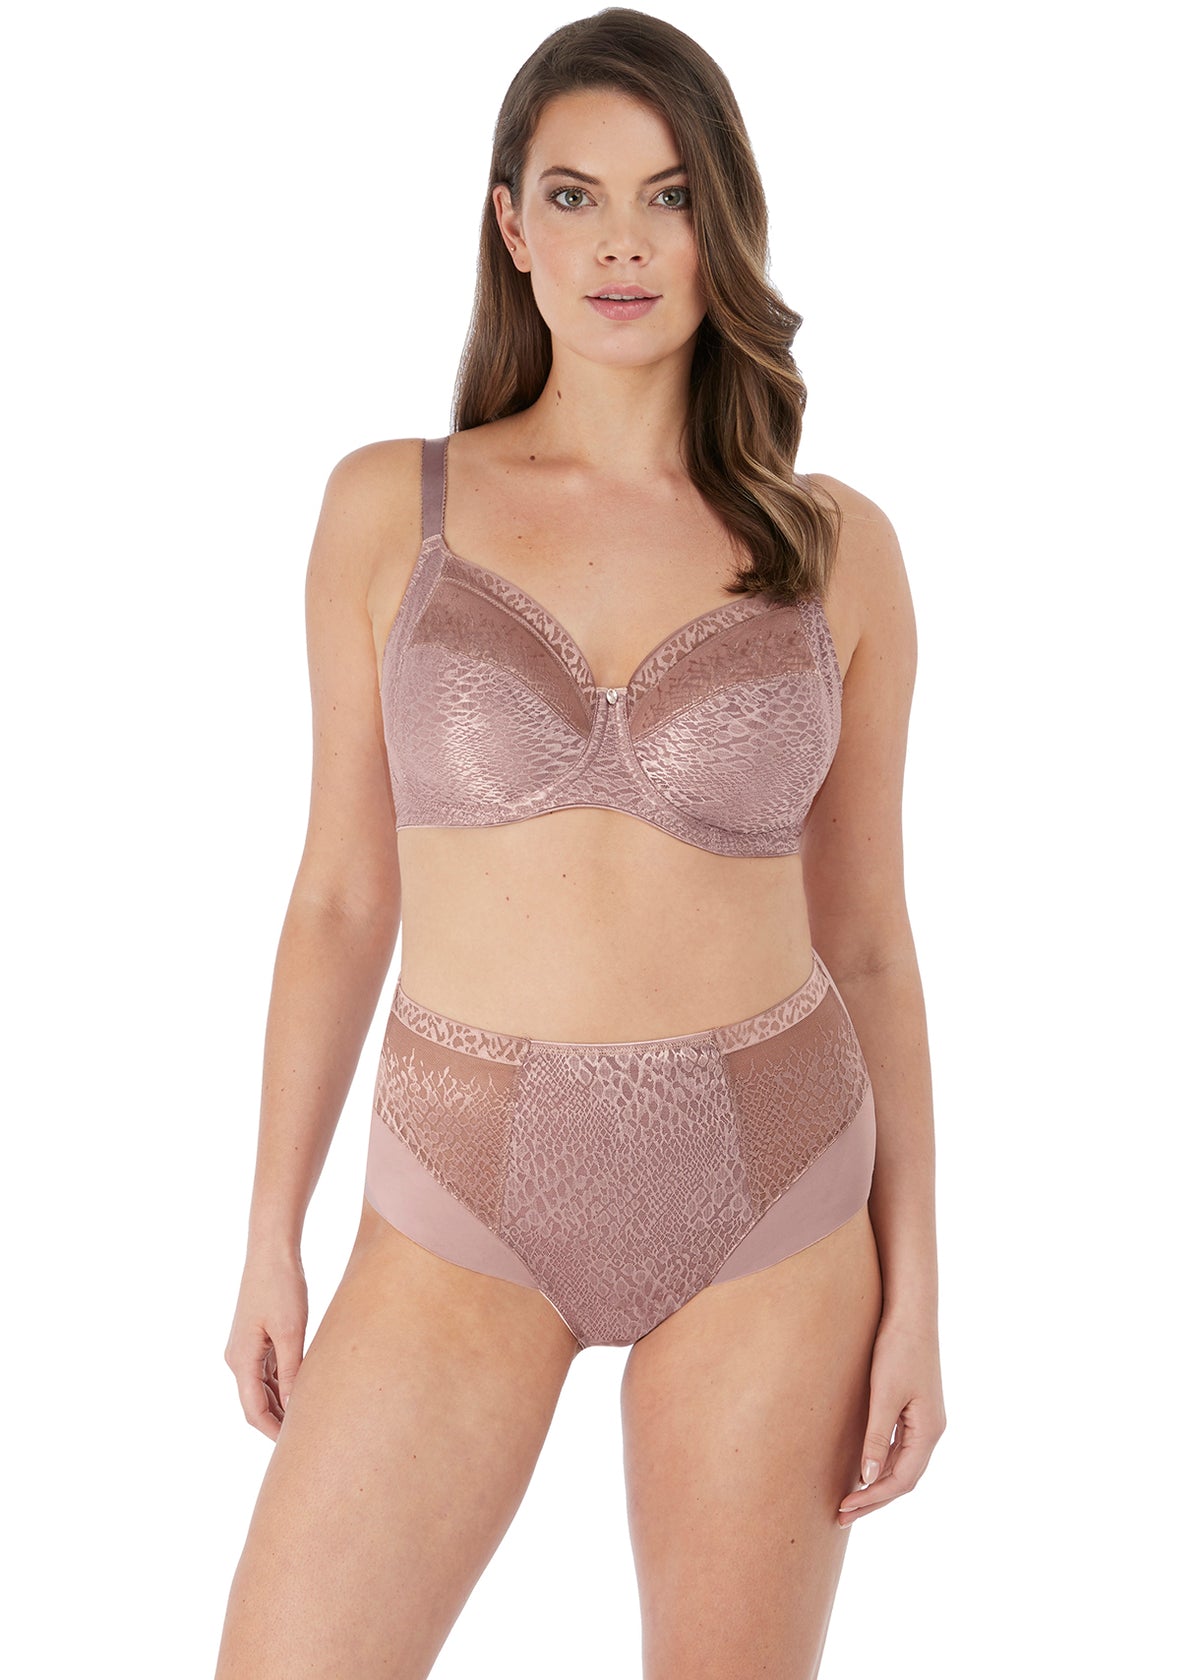 Envisage Full Cup Side Support Bra - Taupe